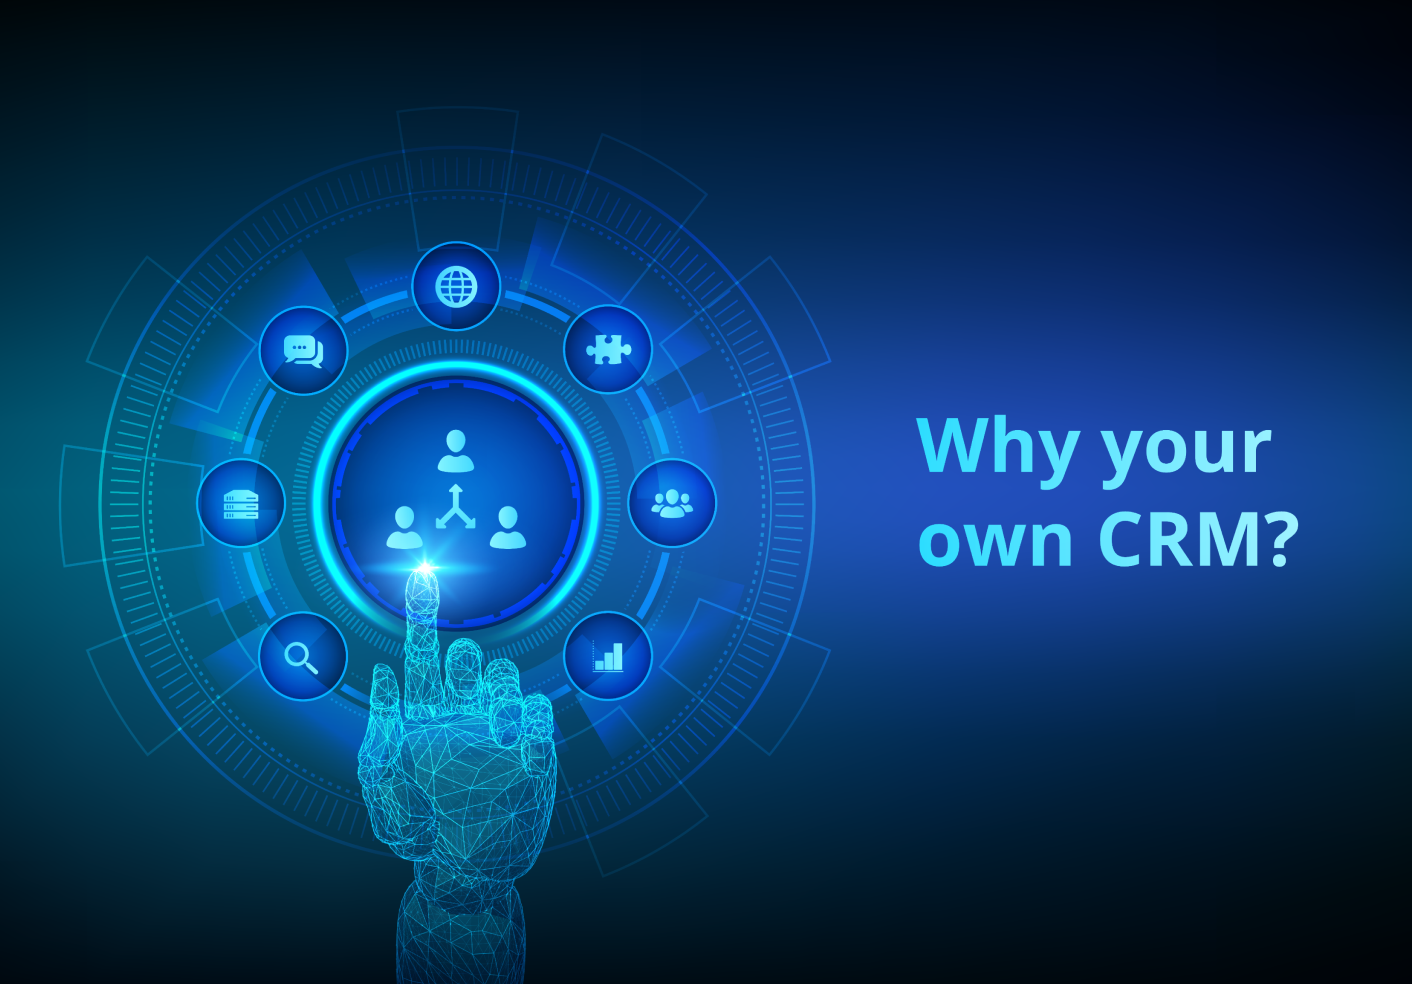 Why should you use your own CRM?